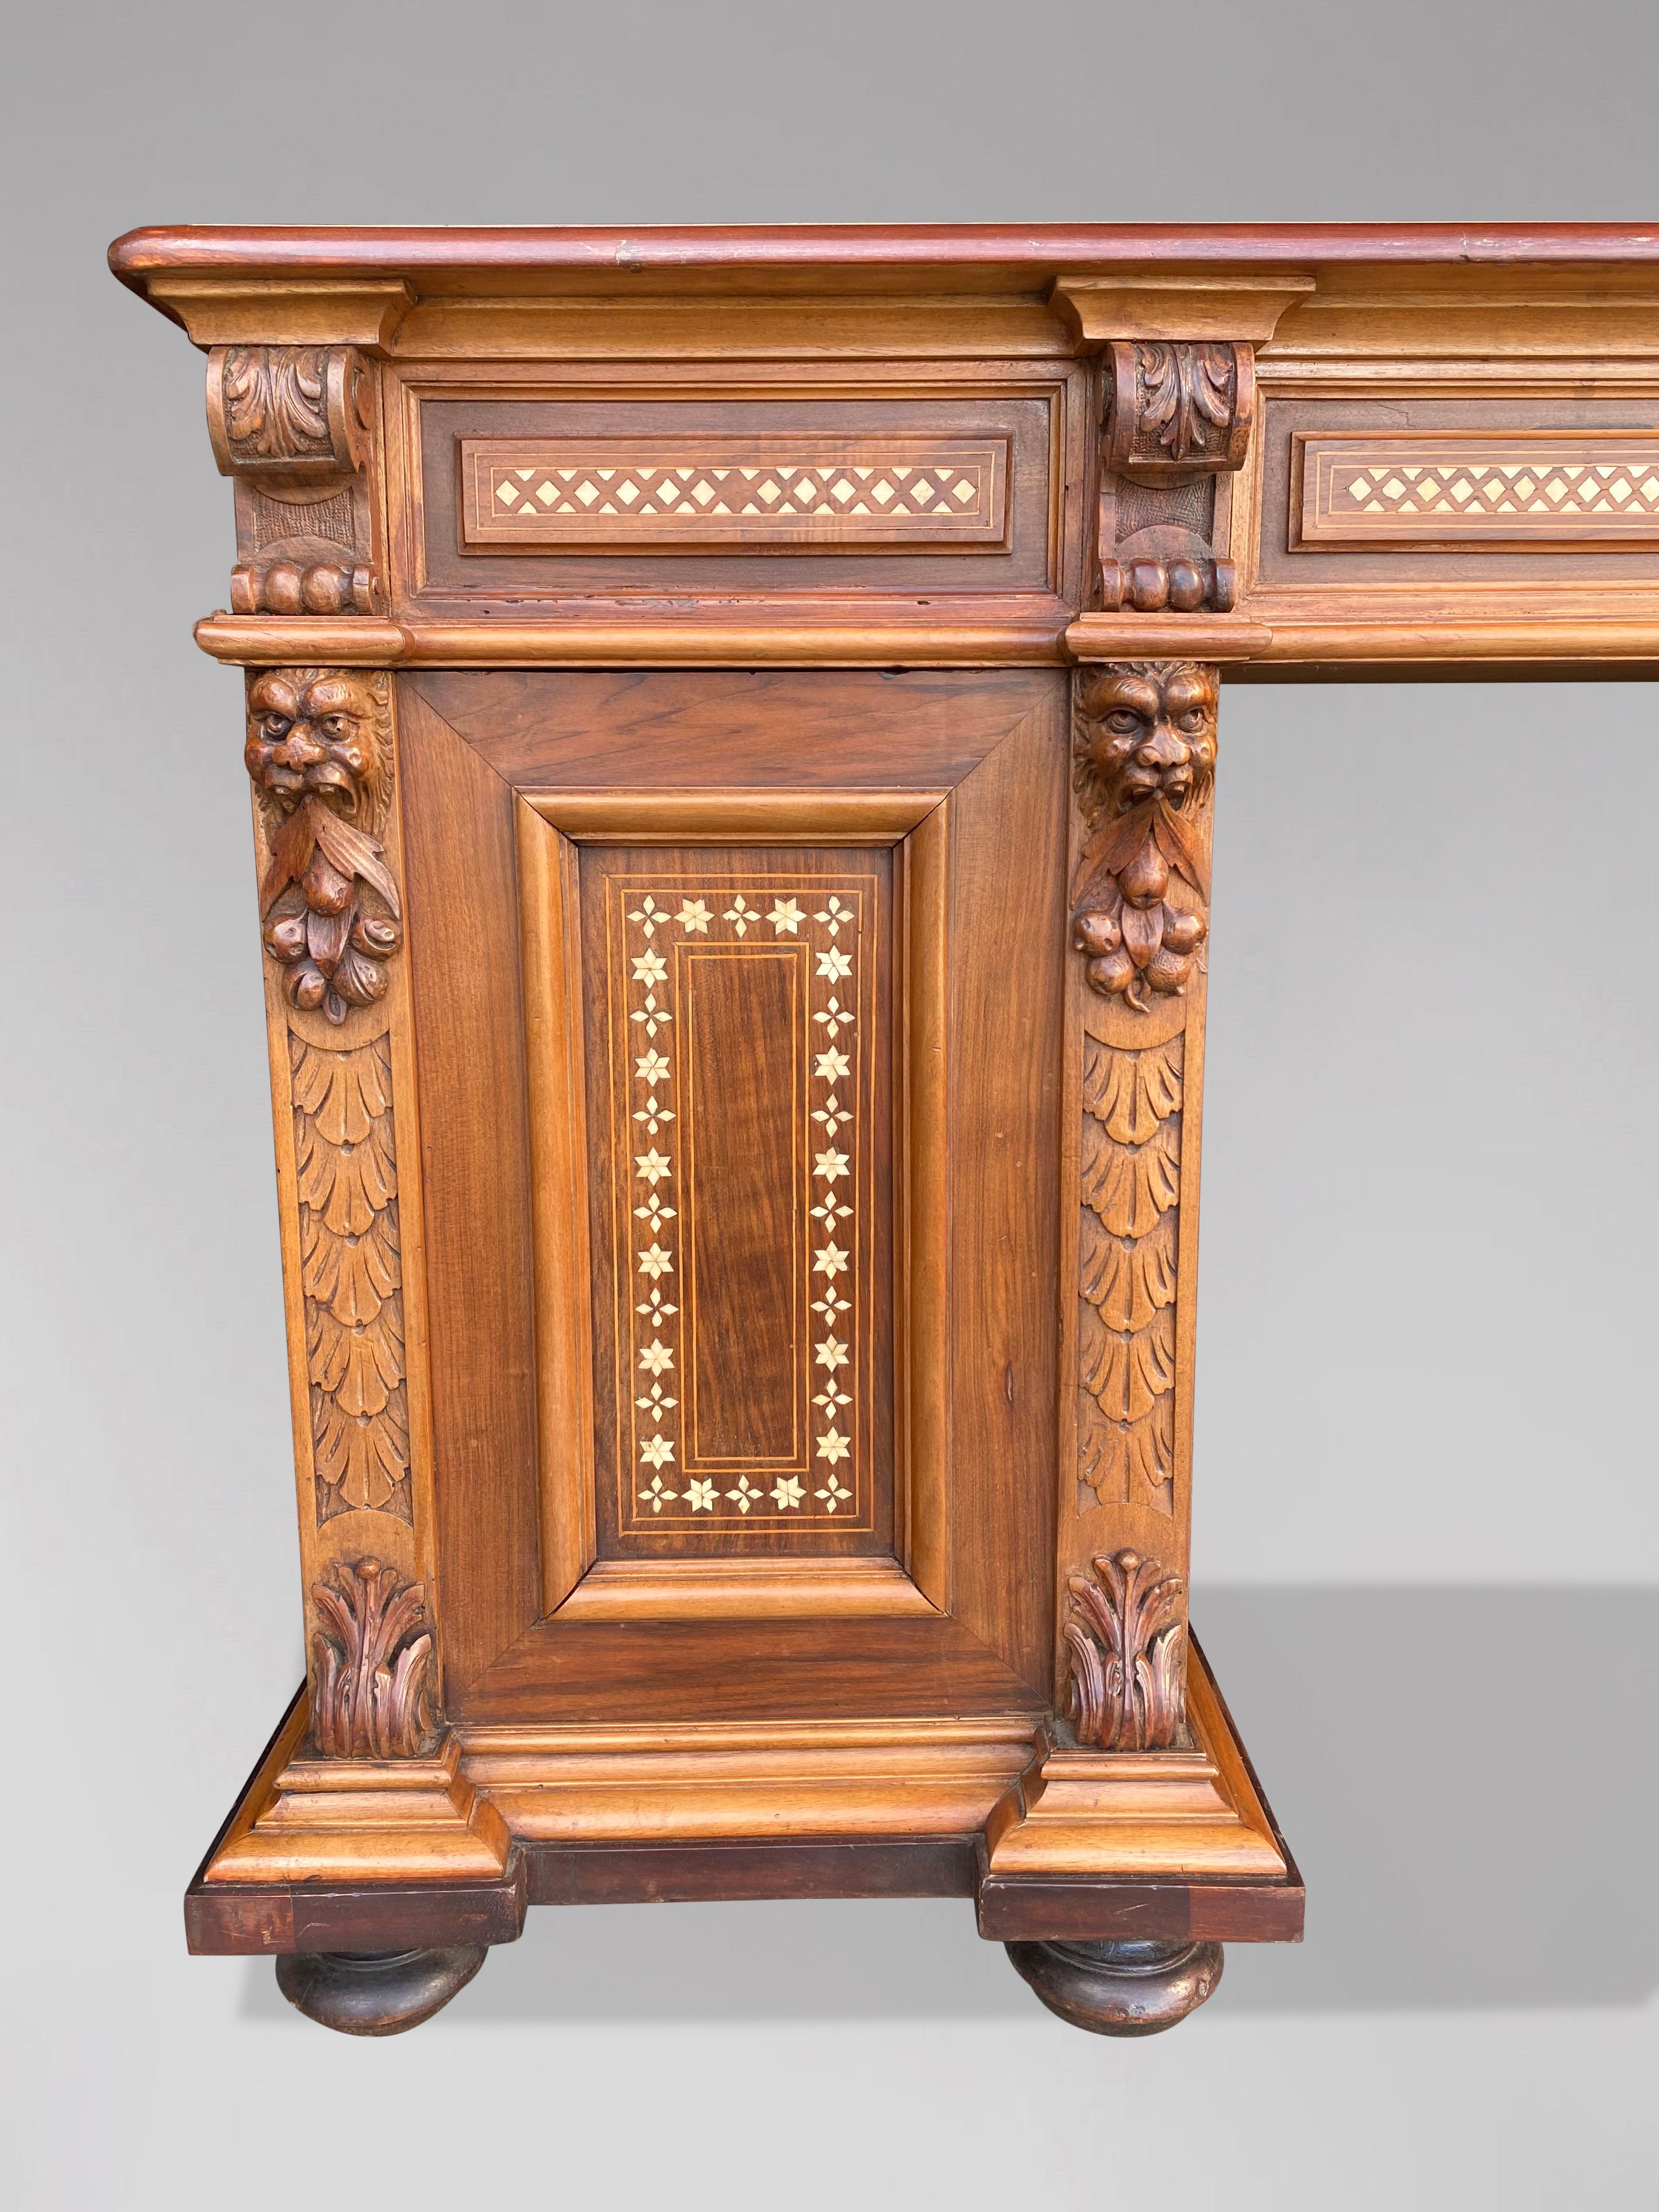 Hand-Crafted Early 20th Century Carved Walnut & Bone Inlay Pedestal Desk